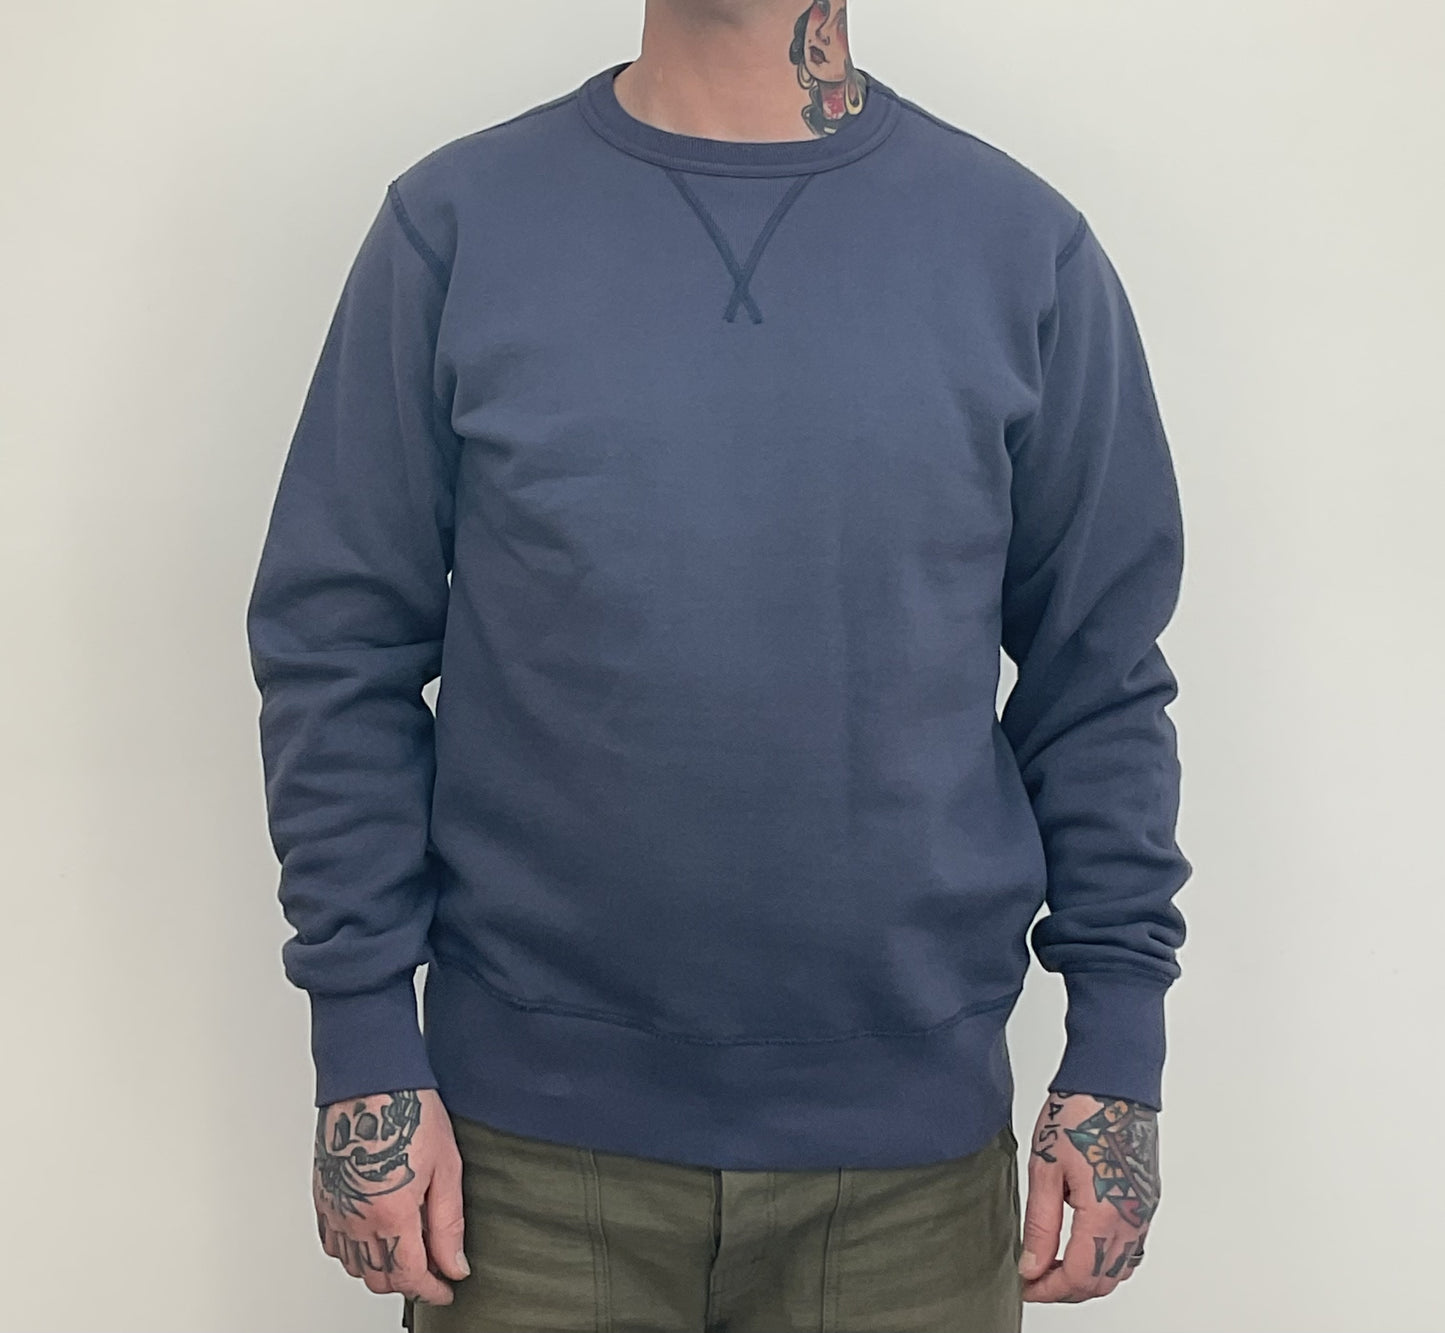 heavyweight, japanese cotton, crewnecks that are built to last the distance. Buzz Rickson a name synonymous with quality